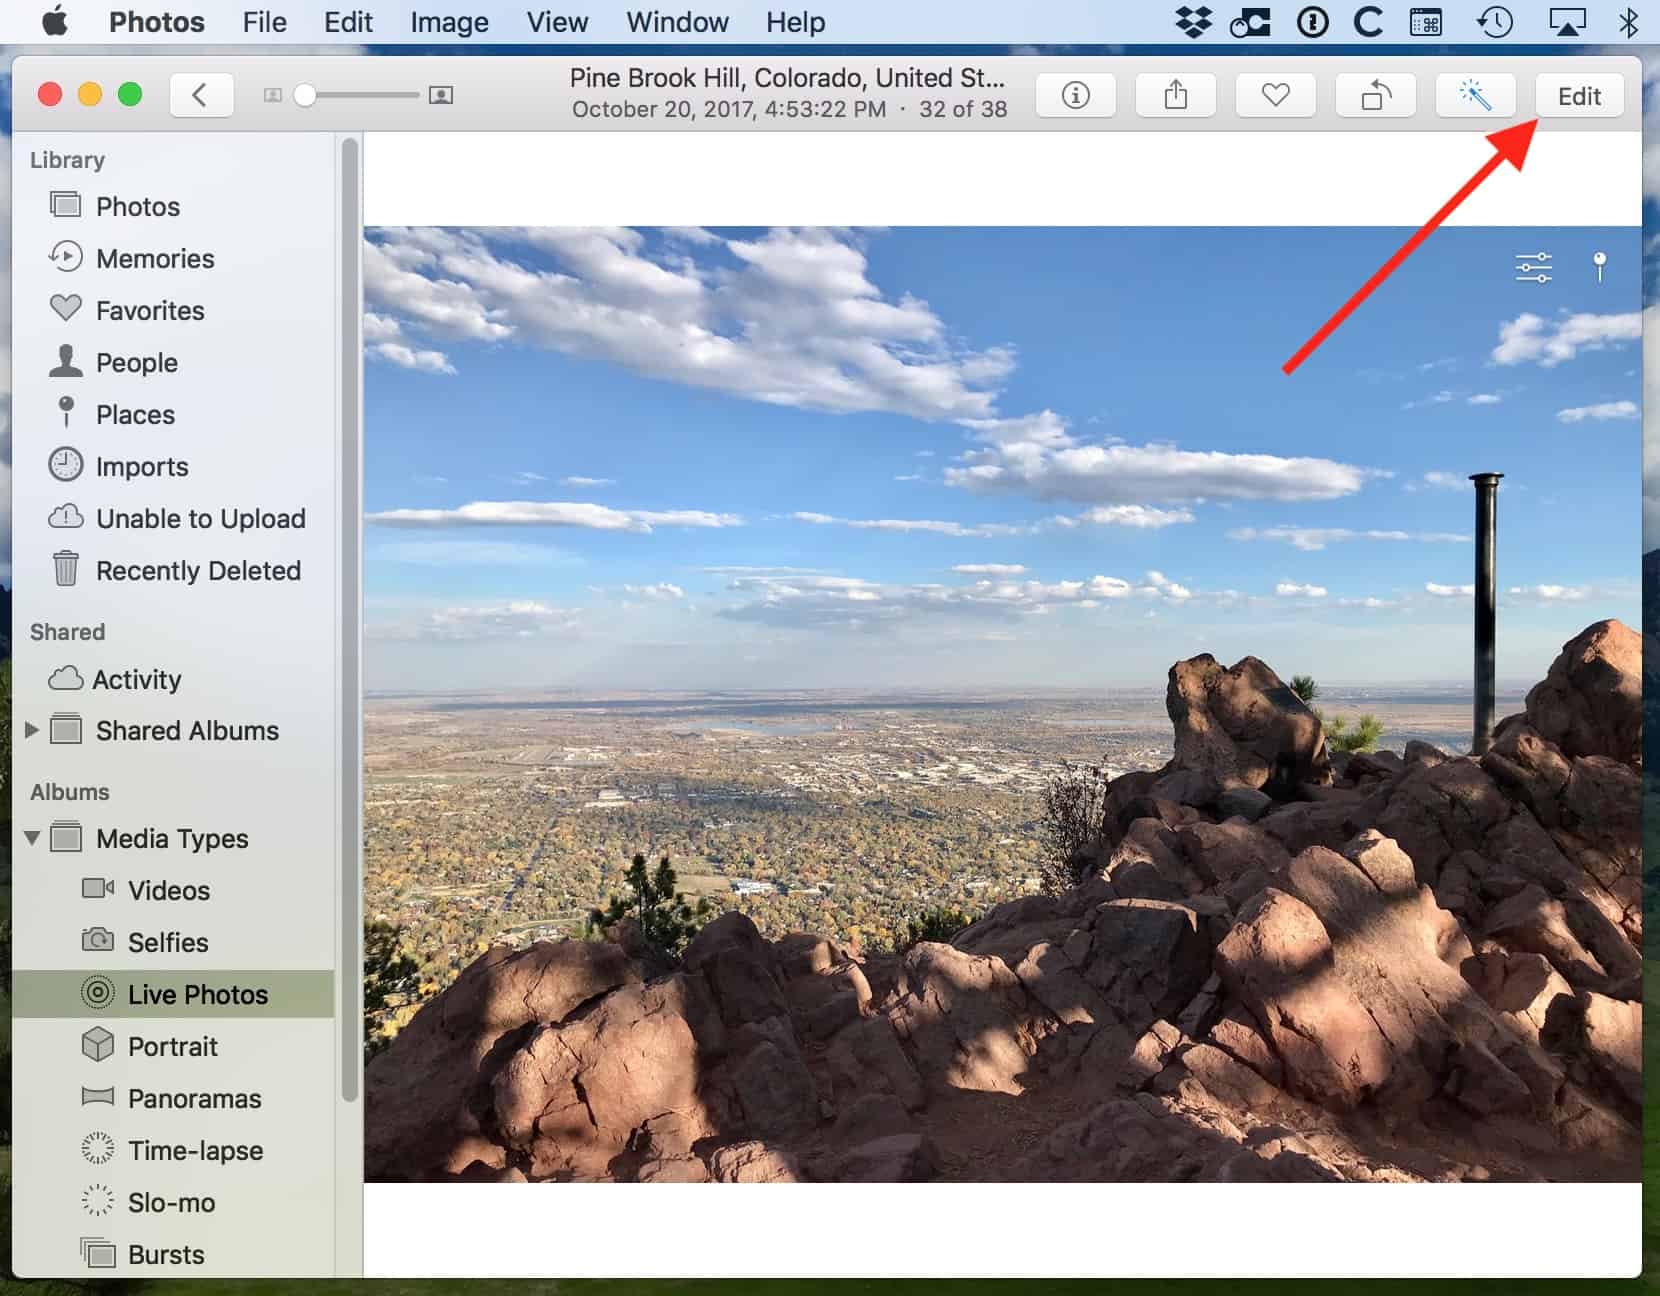 Edit Button in Photos lets you export a Live Photo as an animated GIF in Mac Photos app